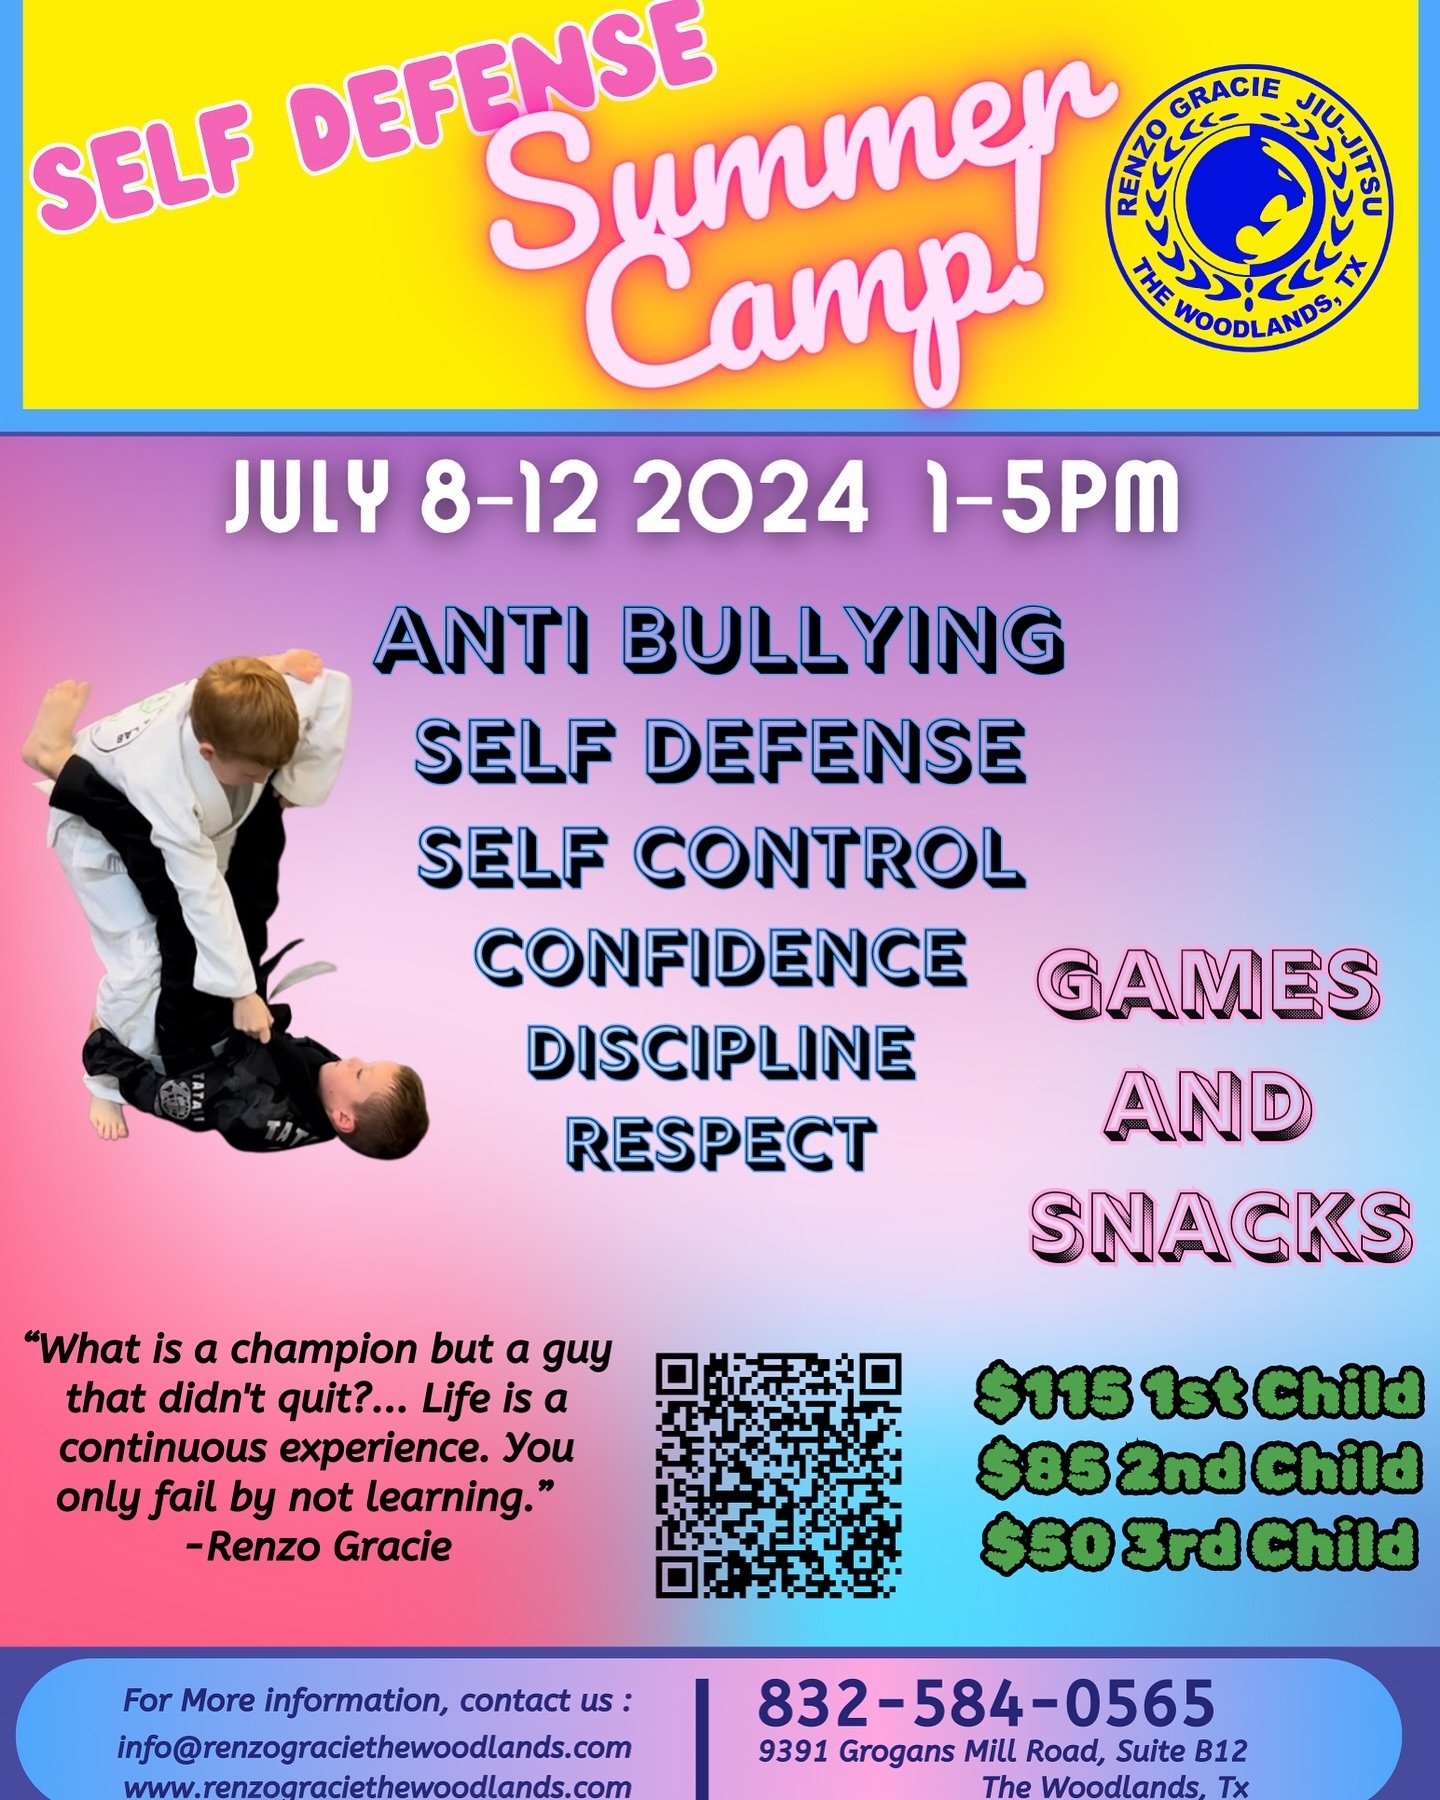 🚨 Exciting News for Parents! 🚨
LINK IN BIO via linktree

This summer, empower your child with the skills they need to stay safe! Join us at Renzo Gracie The Woodlands for our Self-Defense Summer Camp, featuring Jiu Jitsu and Muay Thai.

📅 Date: Ju